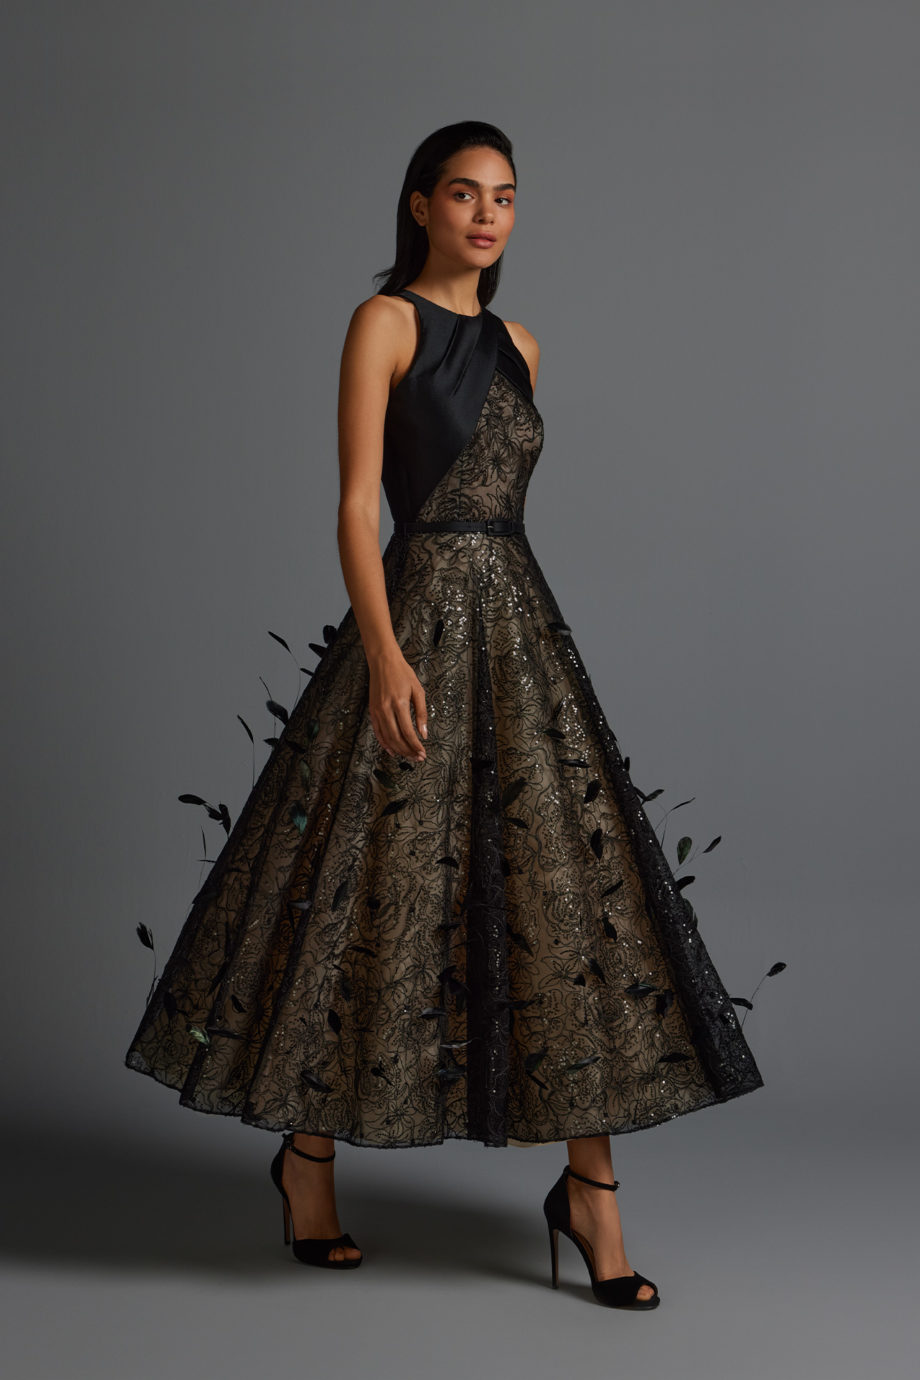 Lace tea-length volume evening dress decorated with feathers and asymmetrical draped top